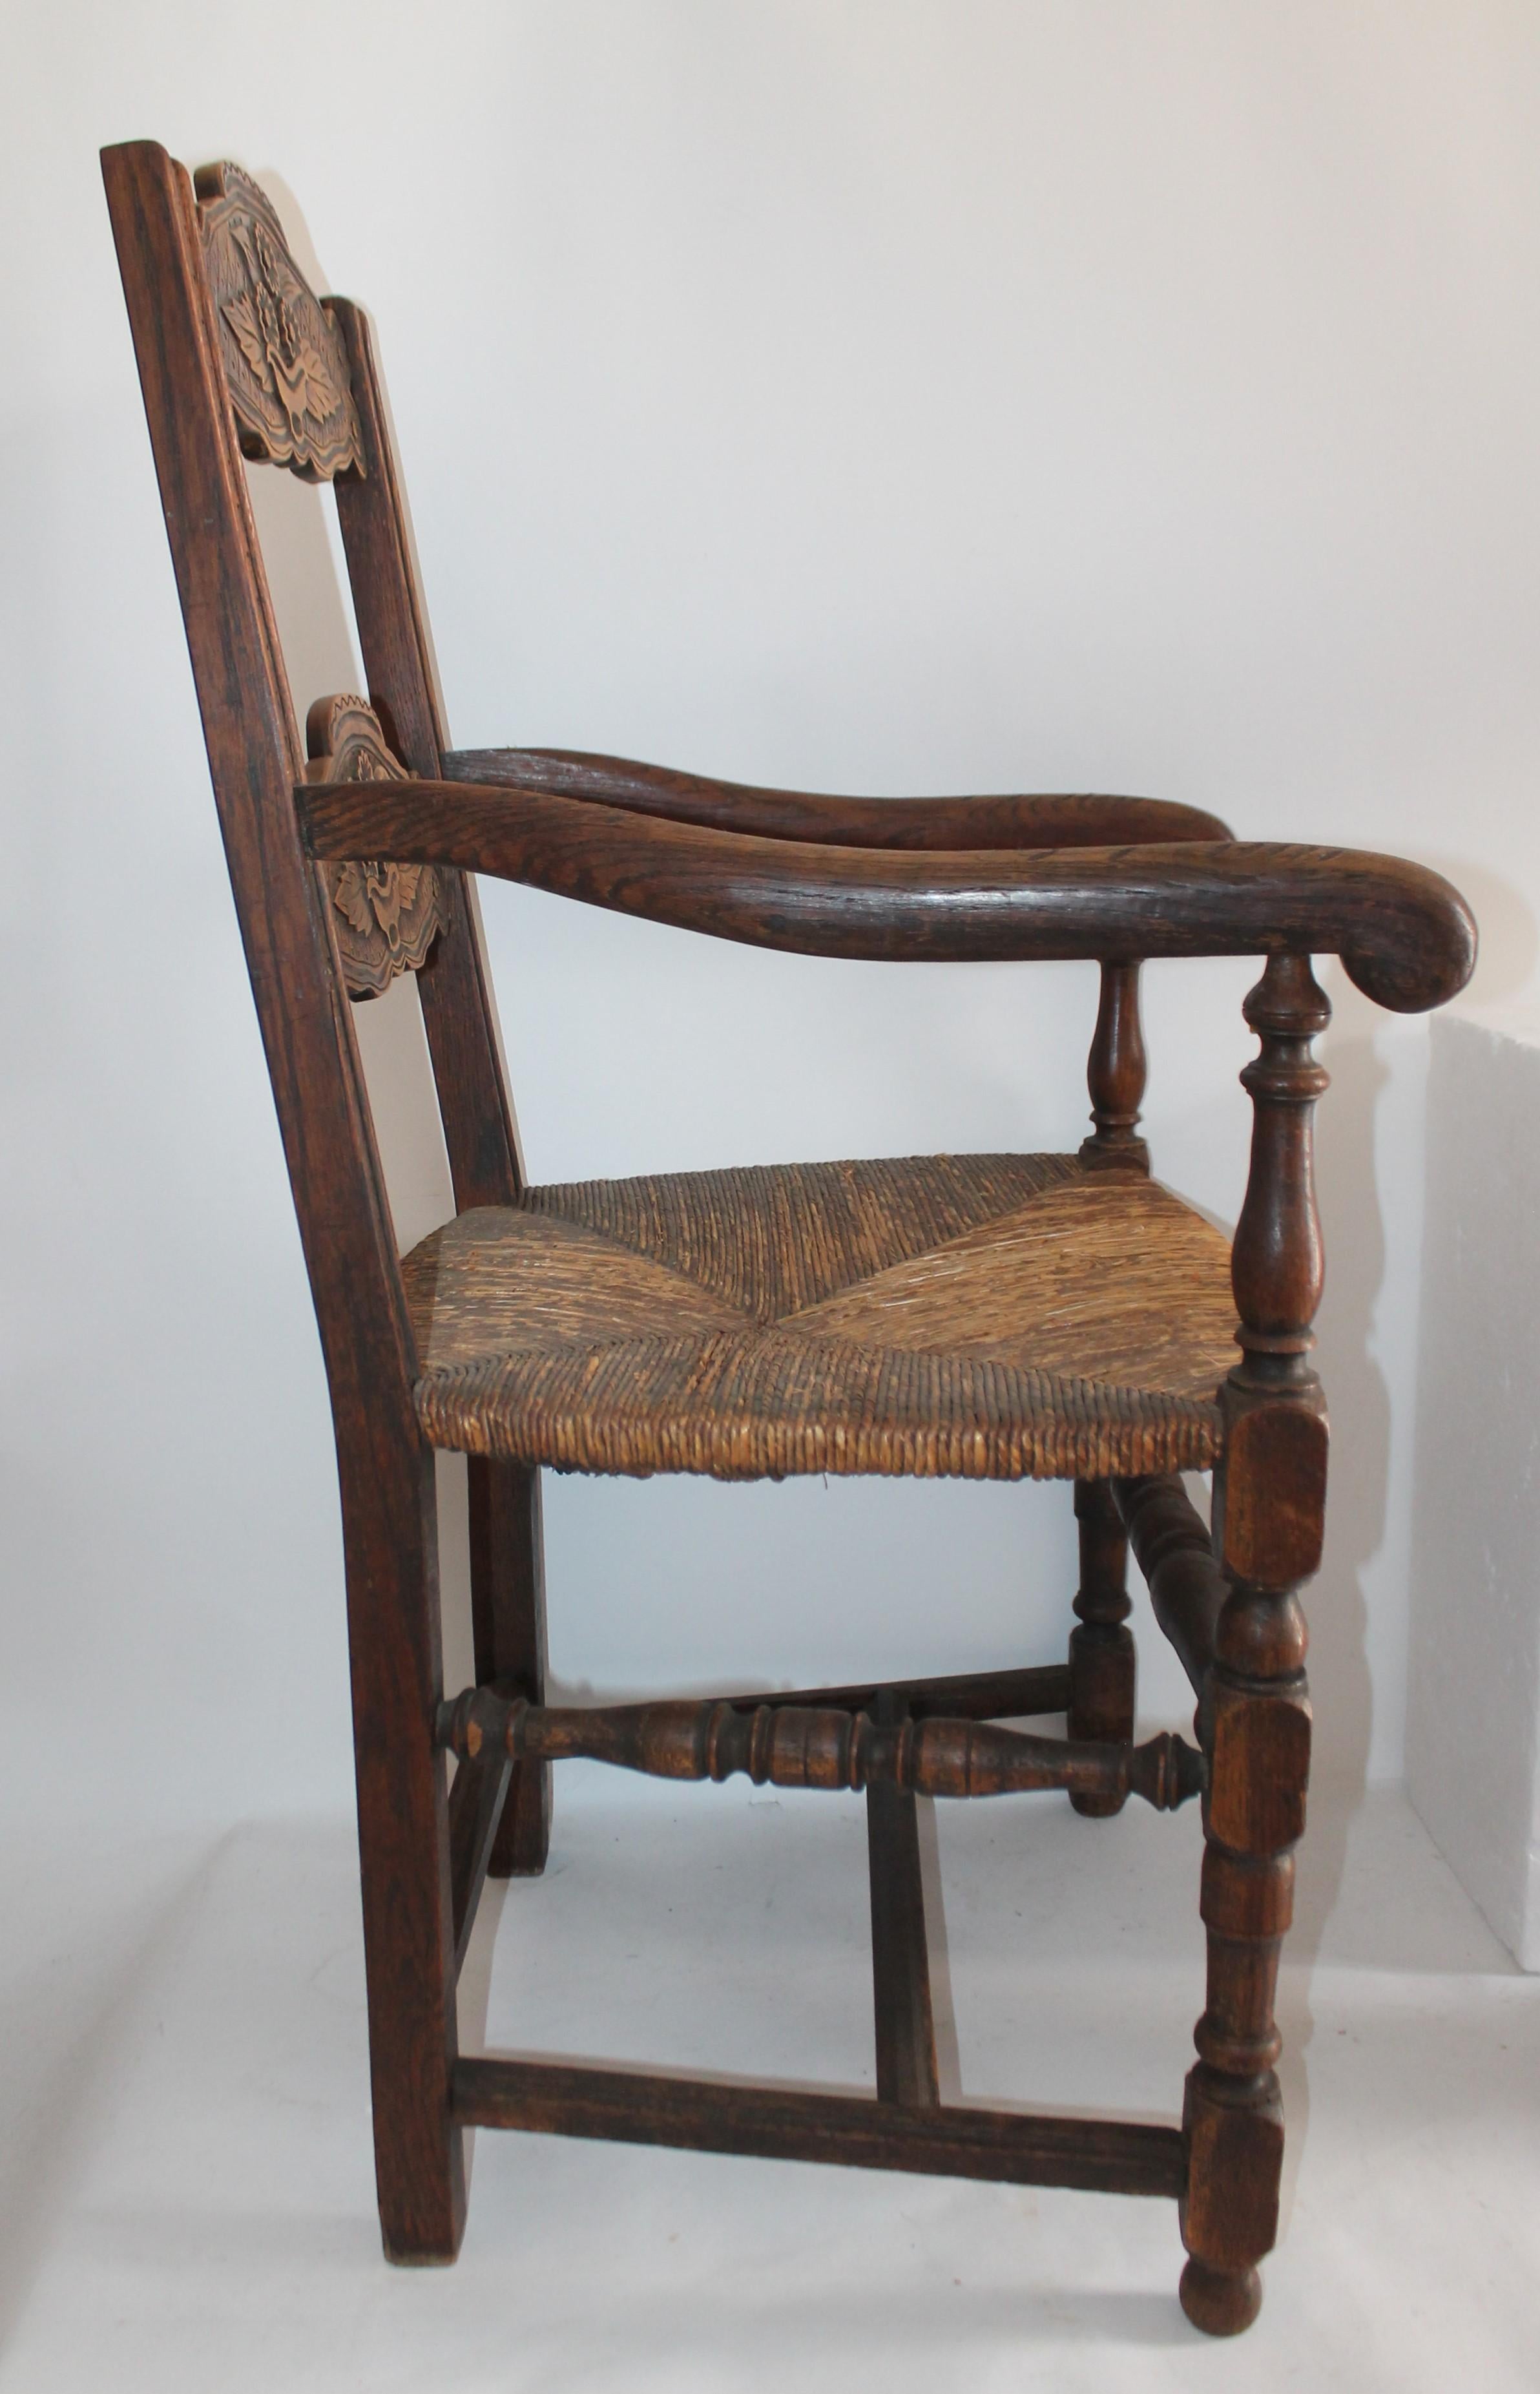 19th century hand carved Mexican /American style armchair. Was found in New Mexico. The seat is the original rush seat.